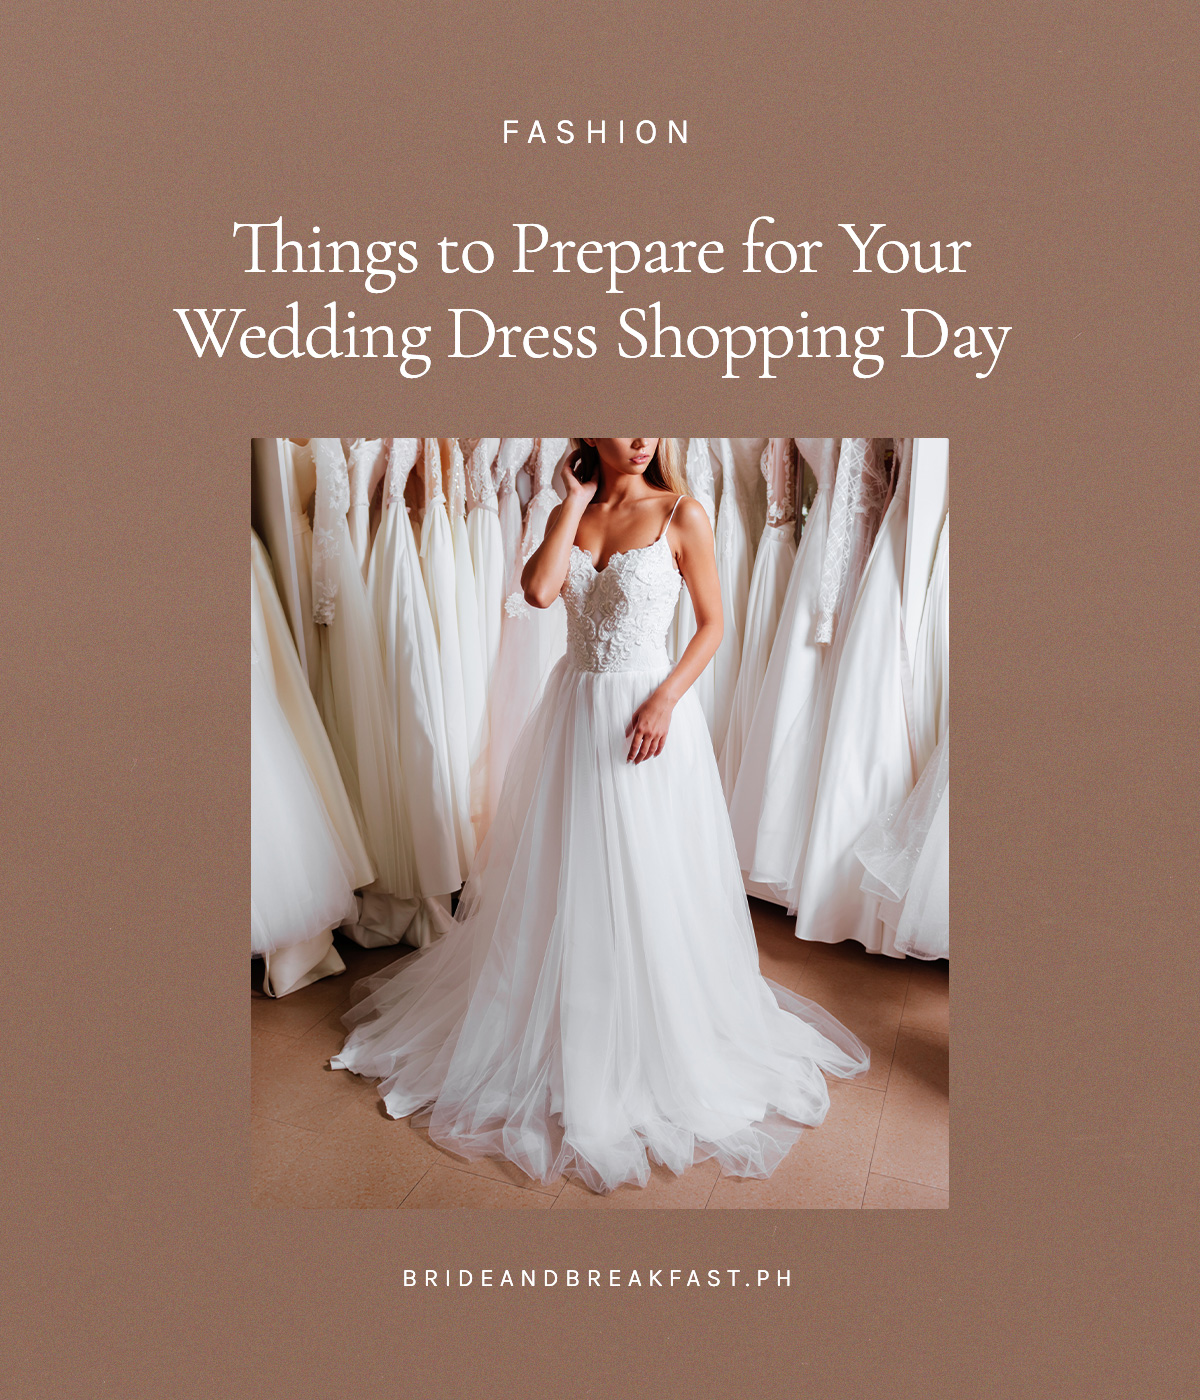 Things to Prepare for Your Wedding Dress Shopping Day